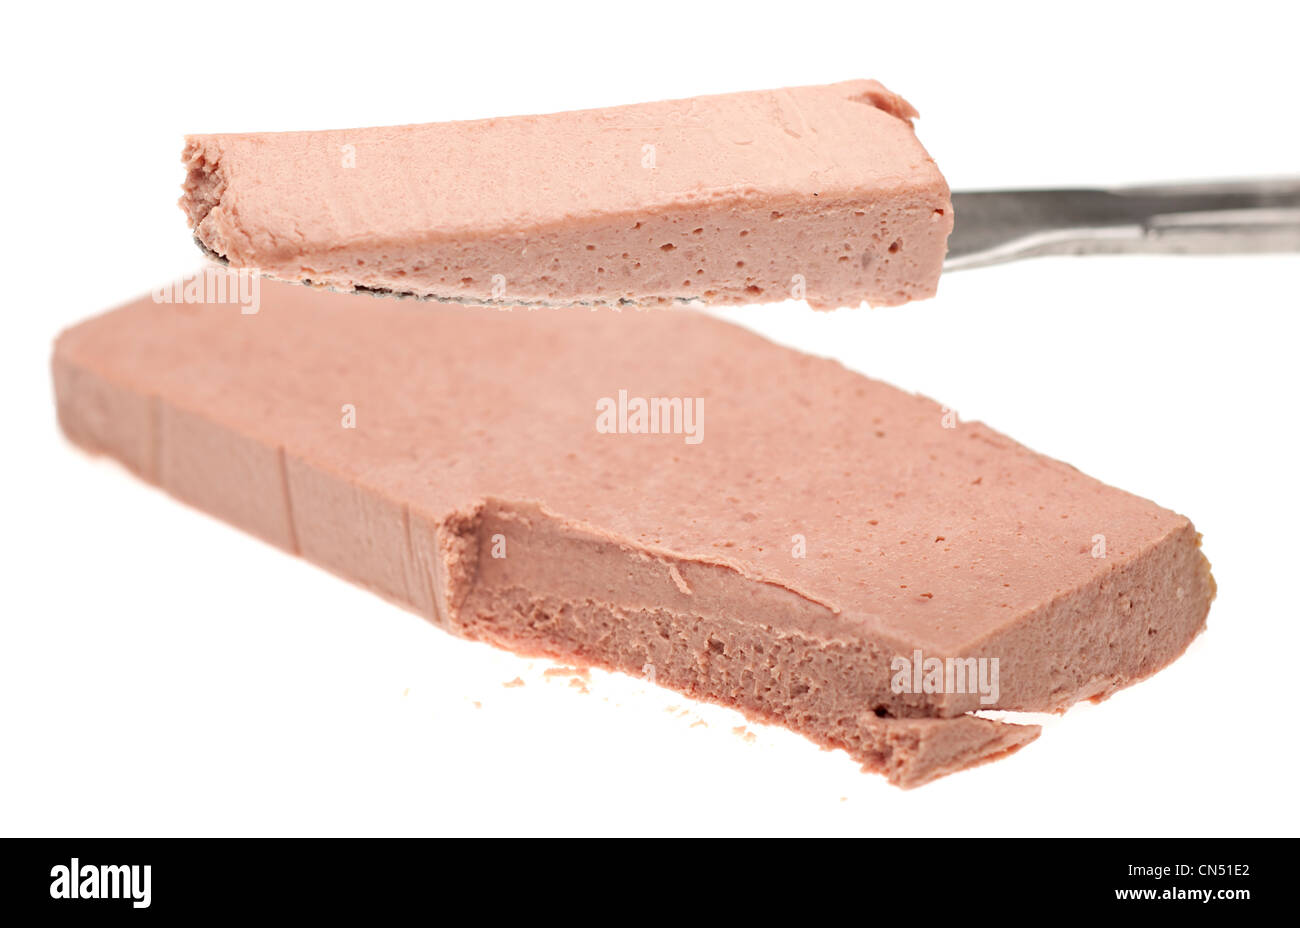 Portion of Brussels pate cut with a knife Stock Photo